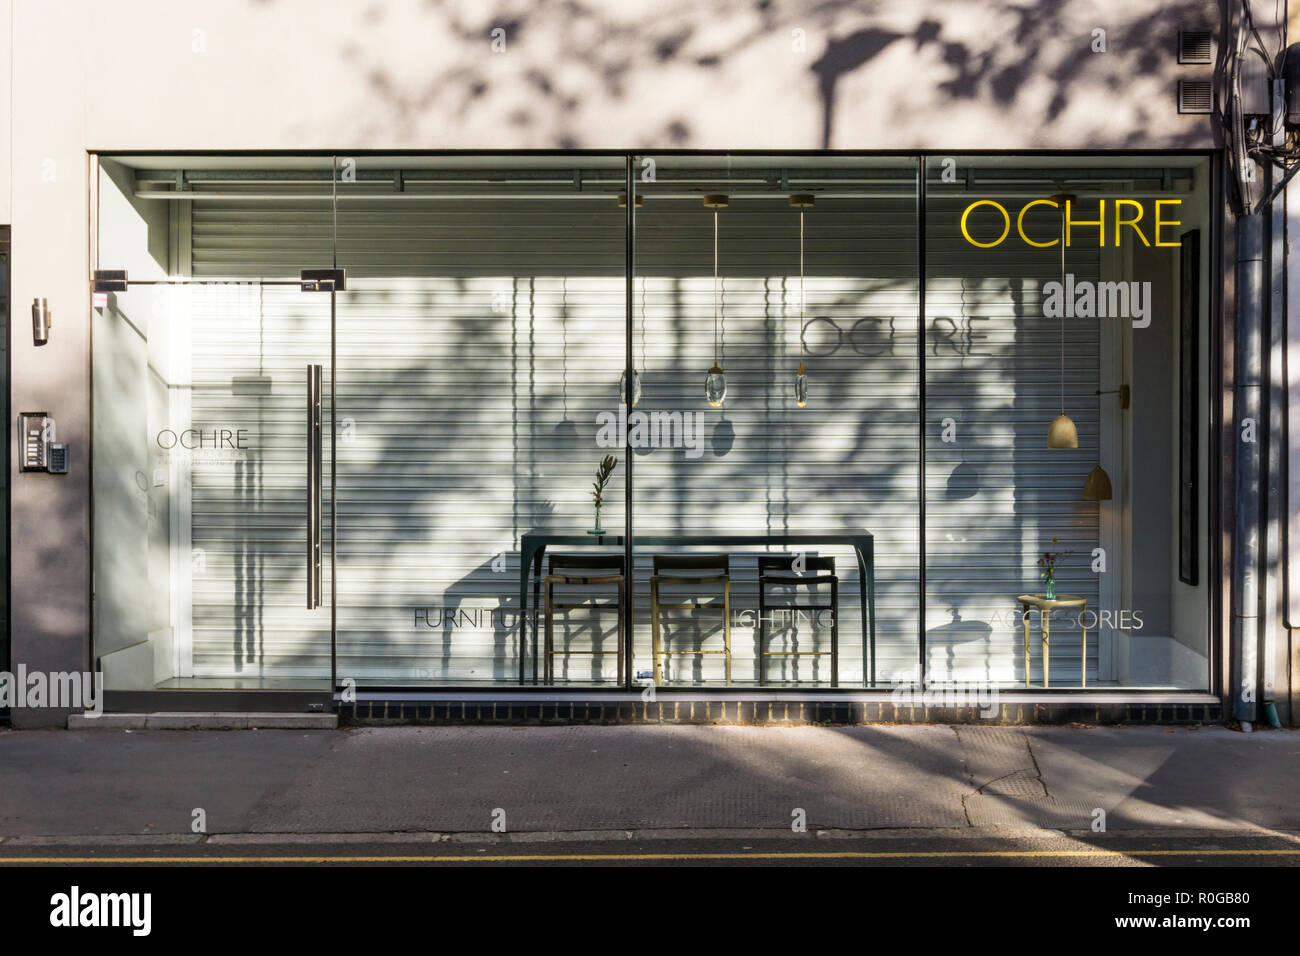 Ochre contemporary furniture, lighting & accessories shop in Clerkenwell, London. Stock Photo